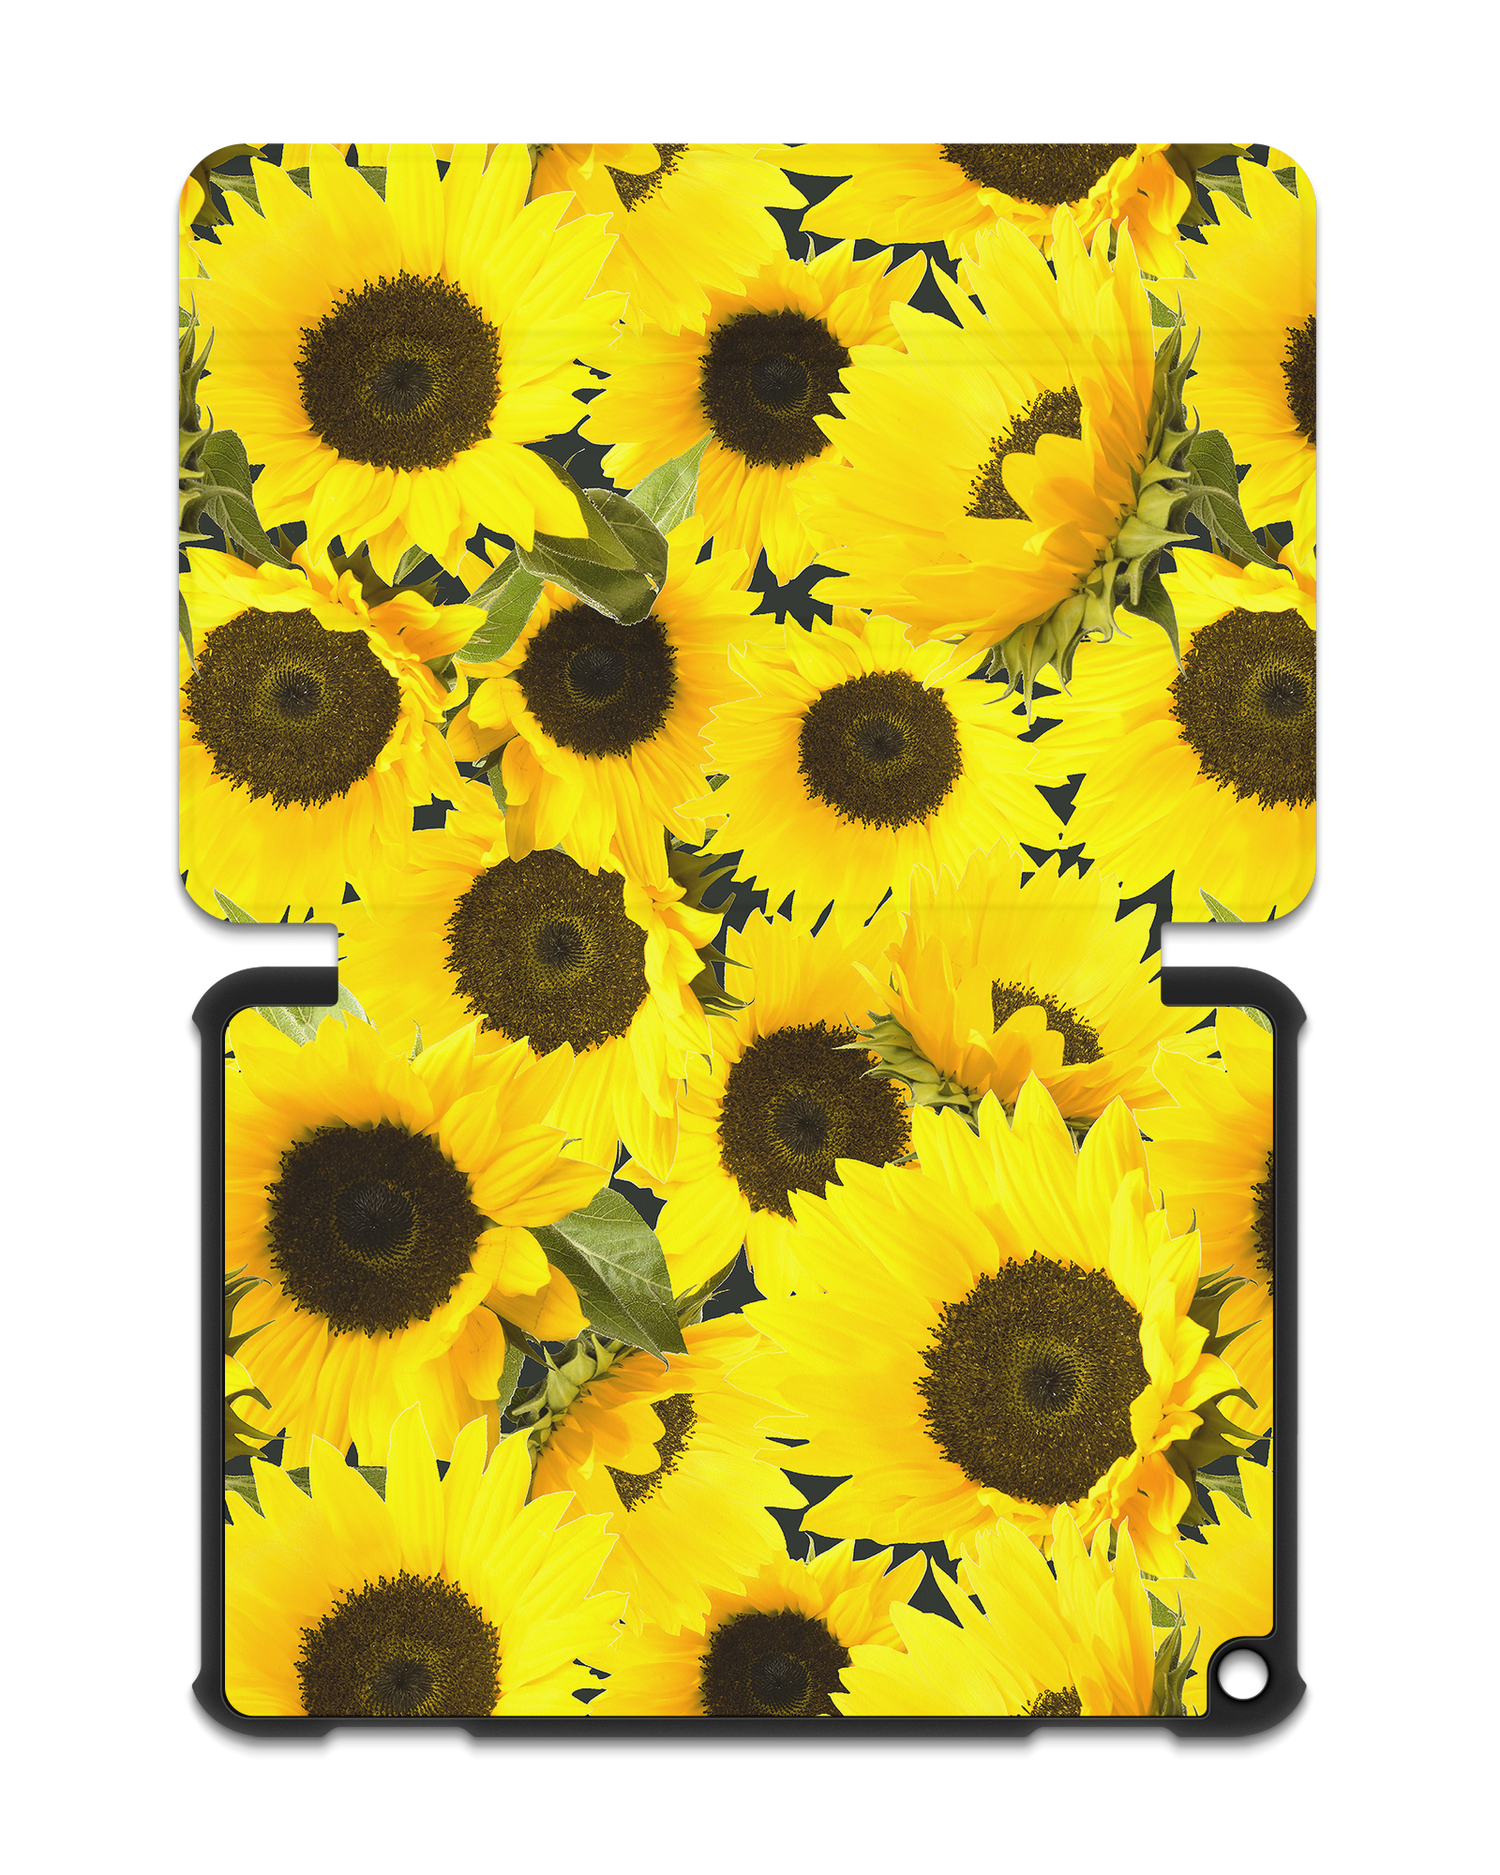 Sunflowers Tablet Smart Case for Amazon Fire HD 8 (2022), Amazon Fire HD 8 Plus (2022), Amazon Fire HD 8 (2020), Amazon Fire HD 8 Plus (2020): Opened